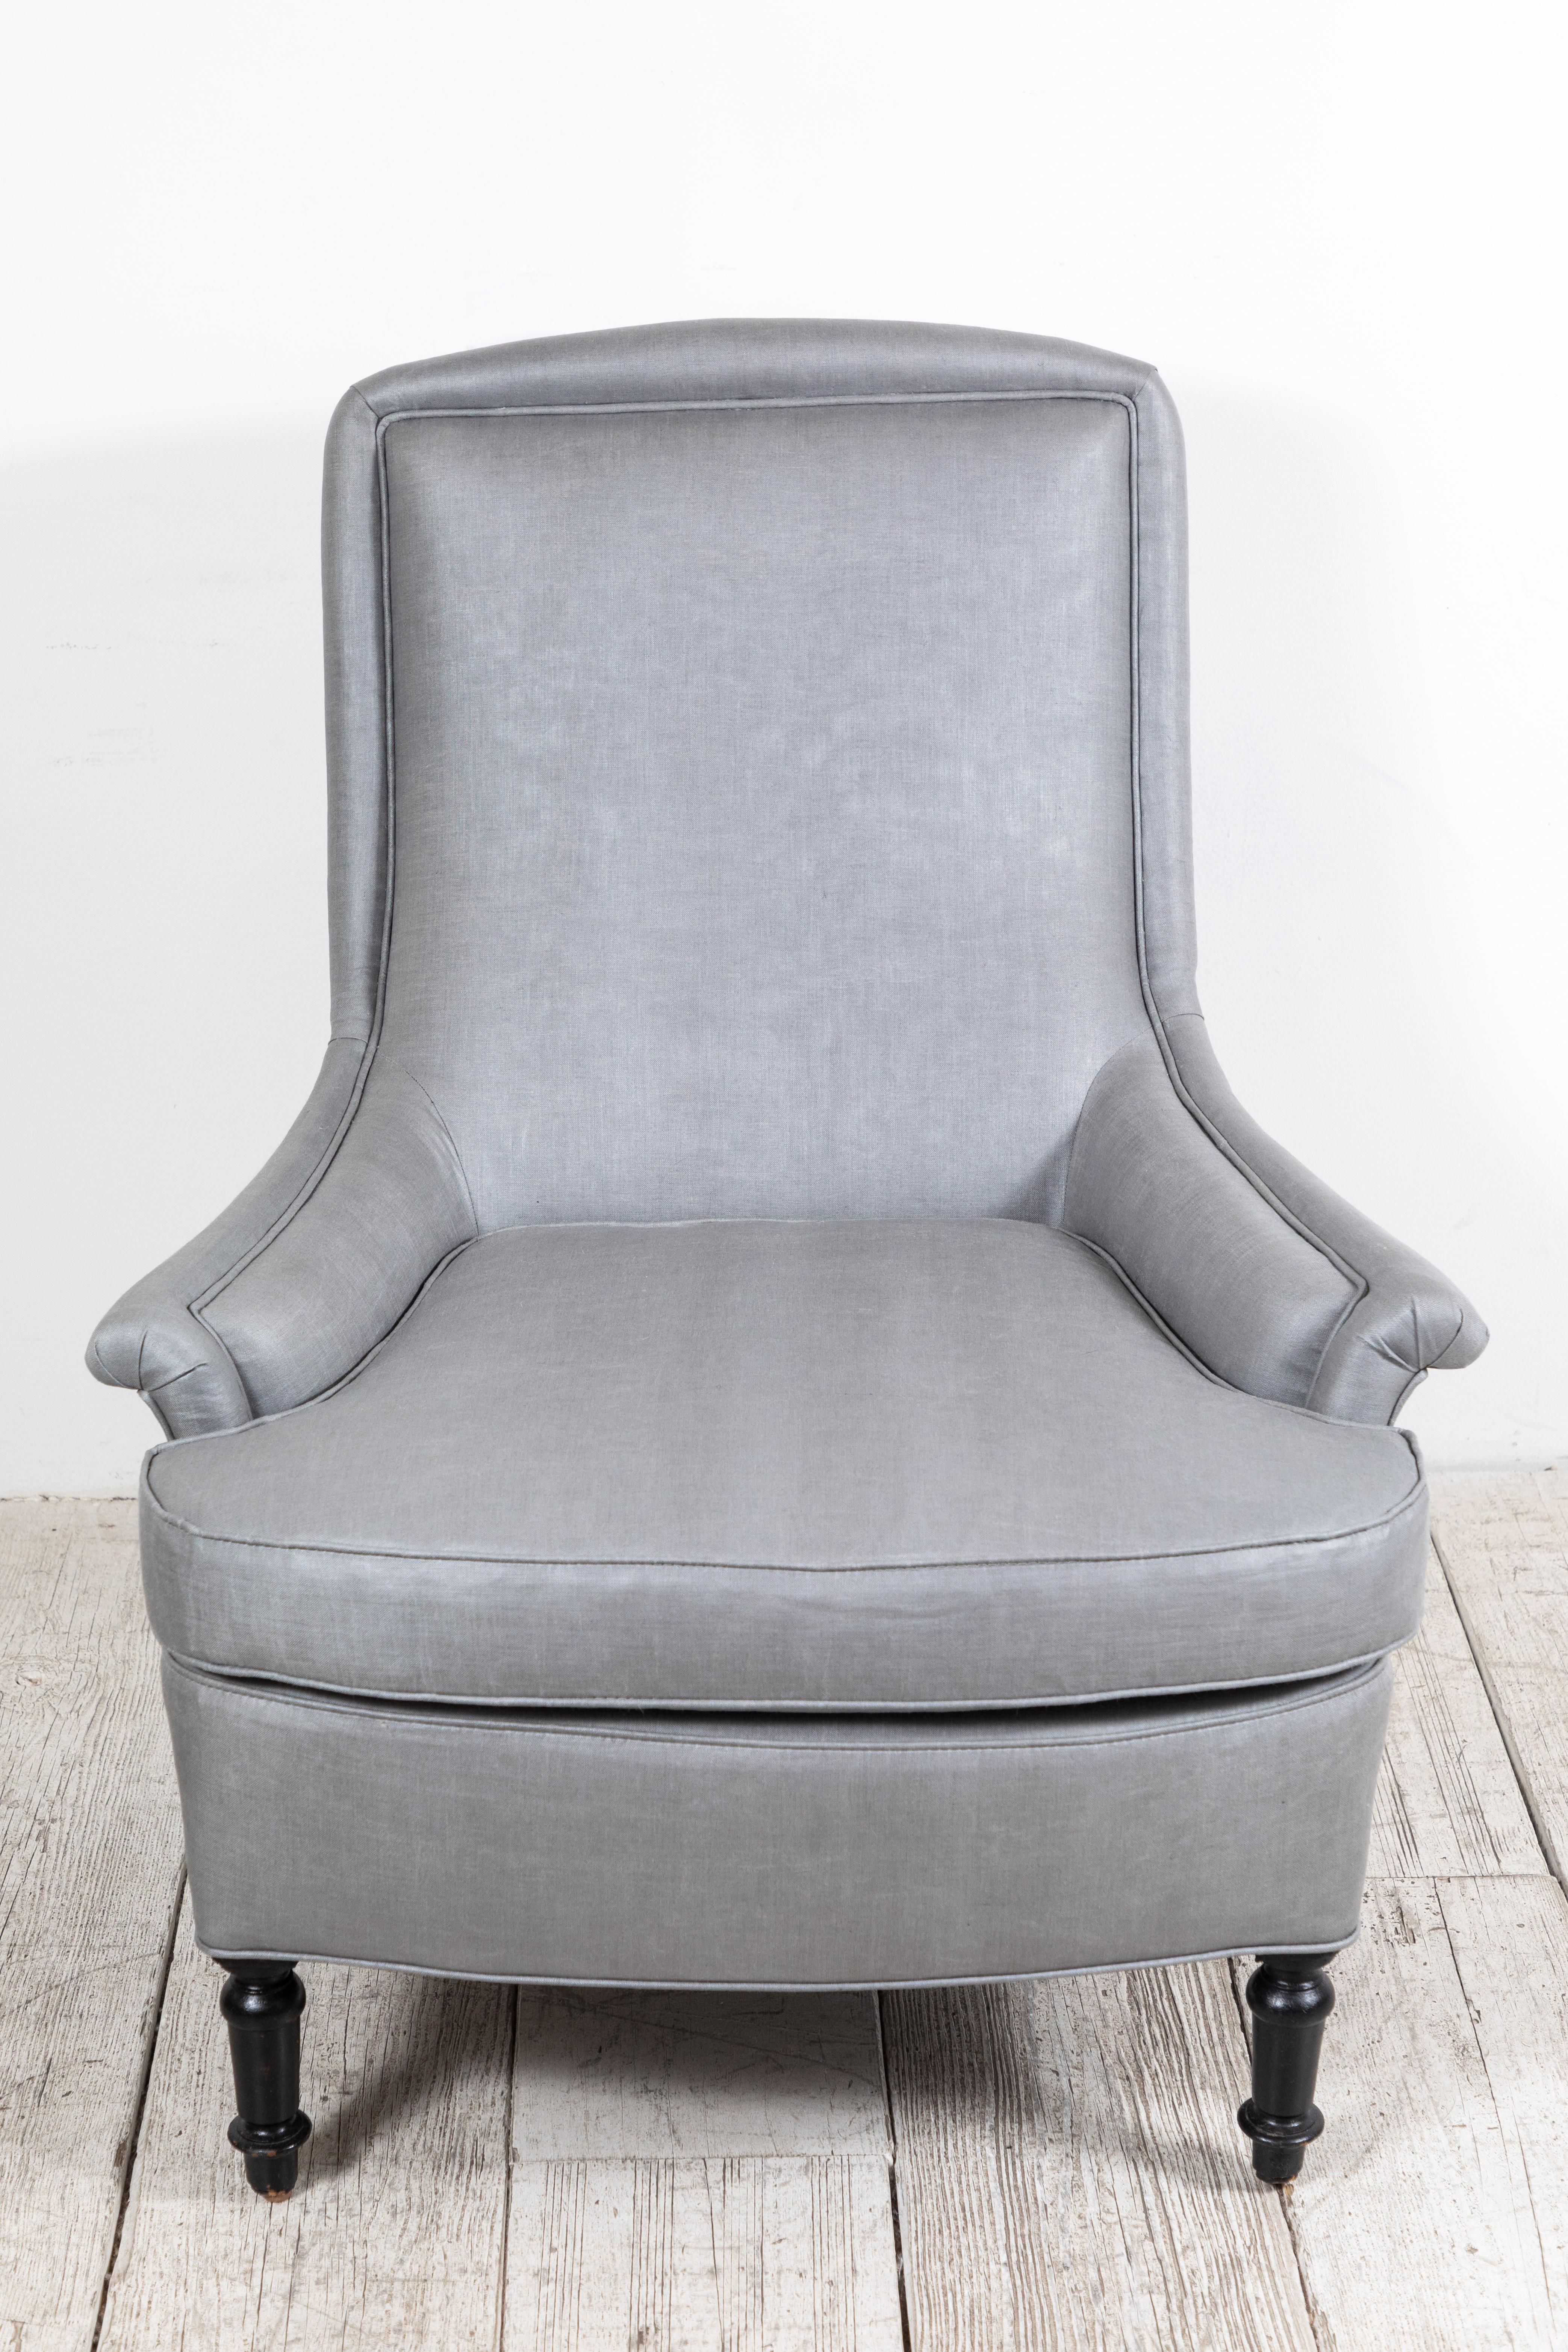 Pair of French Club Chairs Upholstered in Grey Beetled Linen Fabric 1